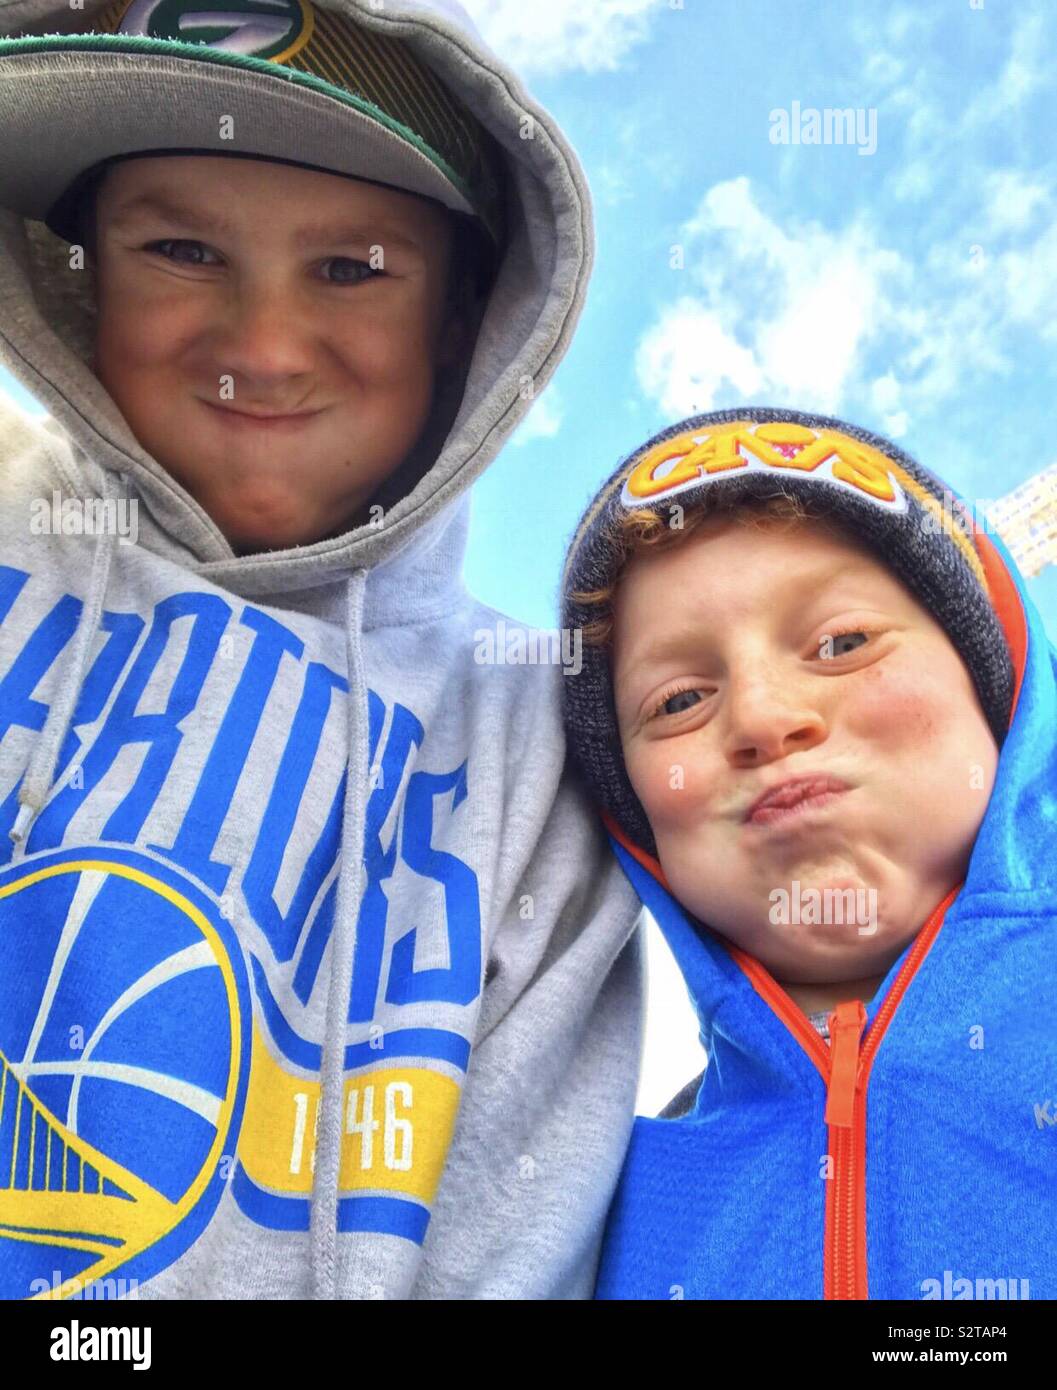 Two preteen boys wearing sweatshirts, hats and hoodies on their heads,while making silly faces and puffy cheeks. Bile sky with clouds Stock Photo